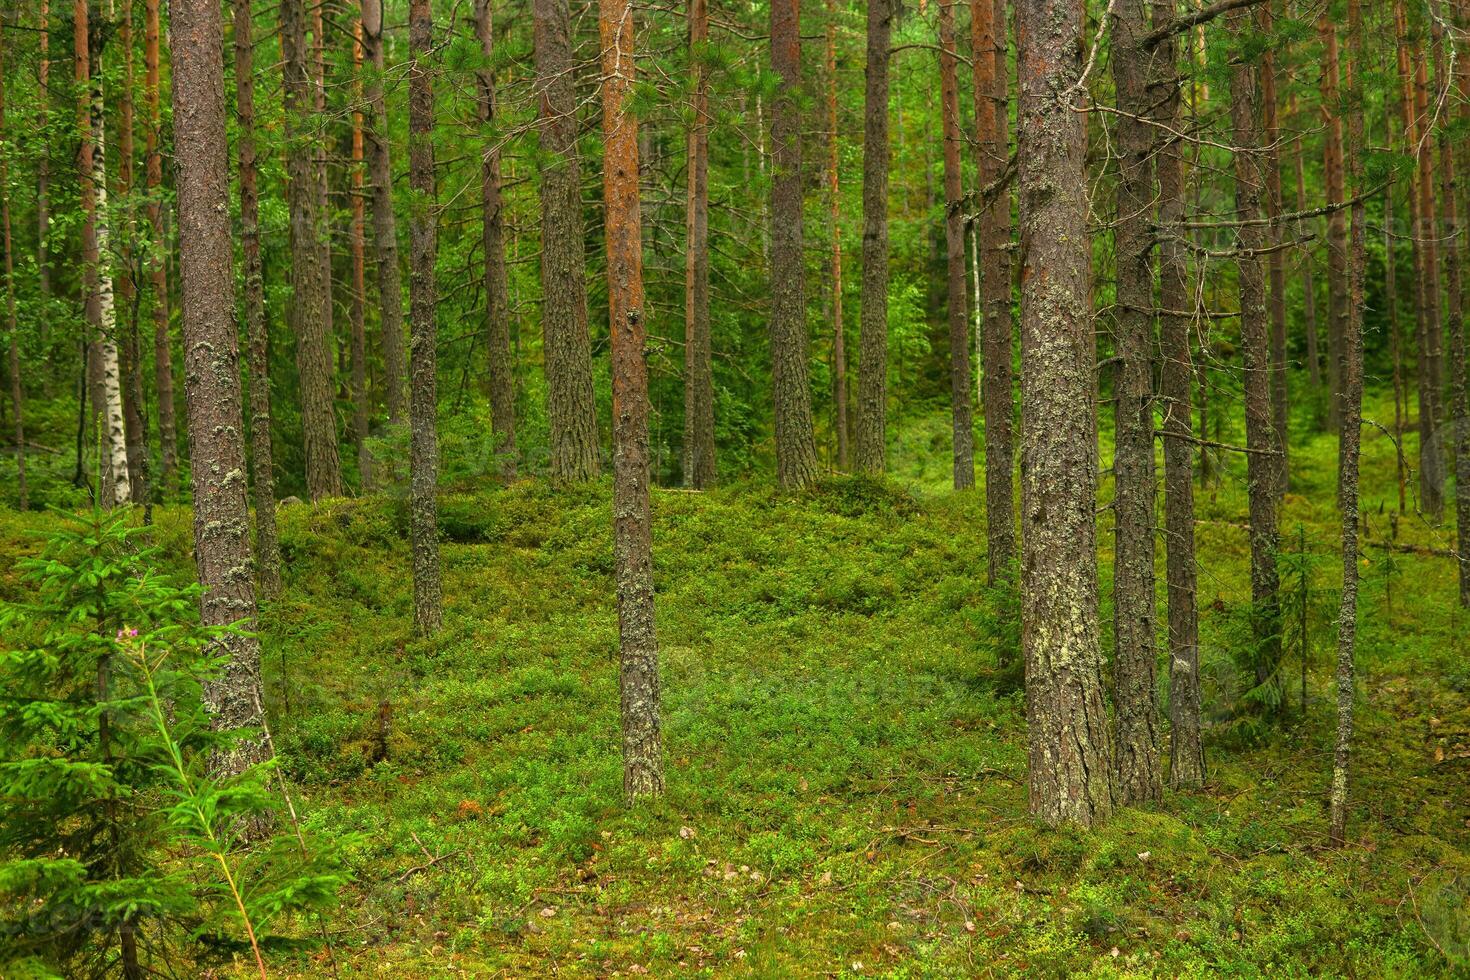 natural landscape, pine boreal forest with moss undergrowth, coniferous taiga photo